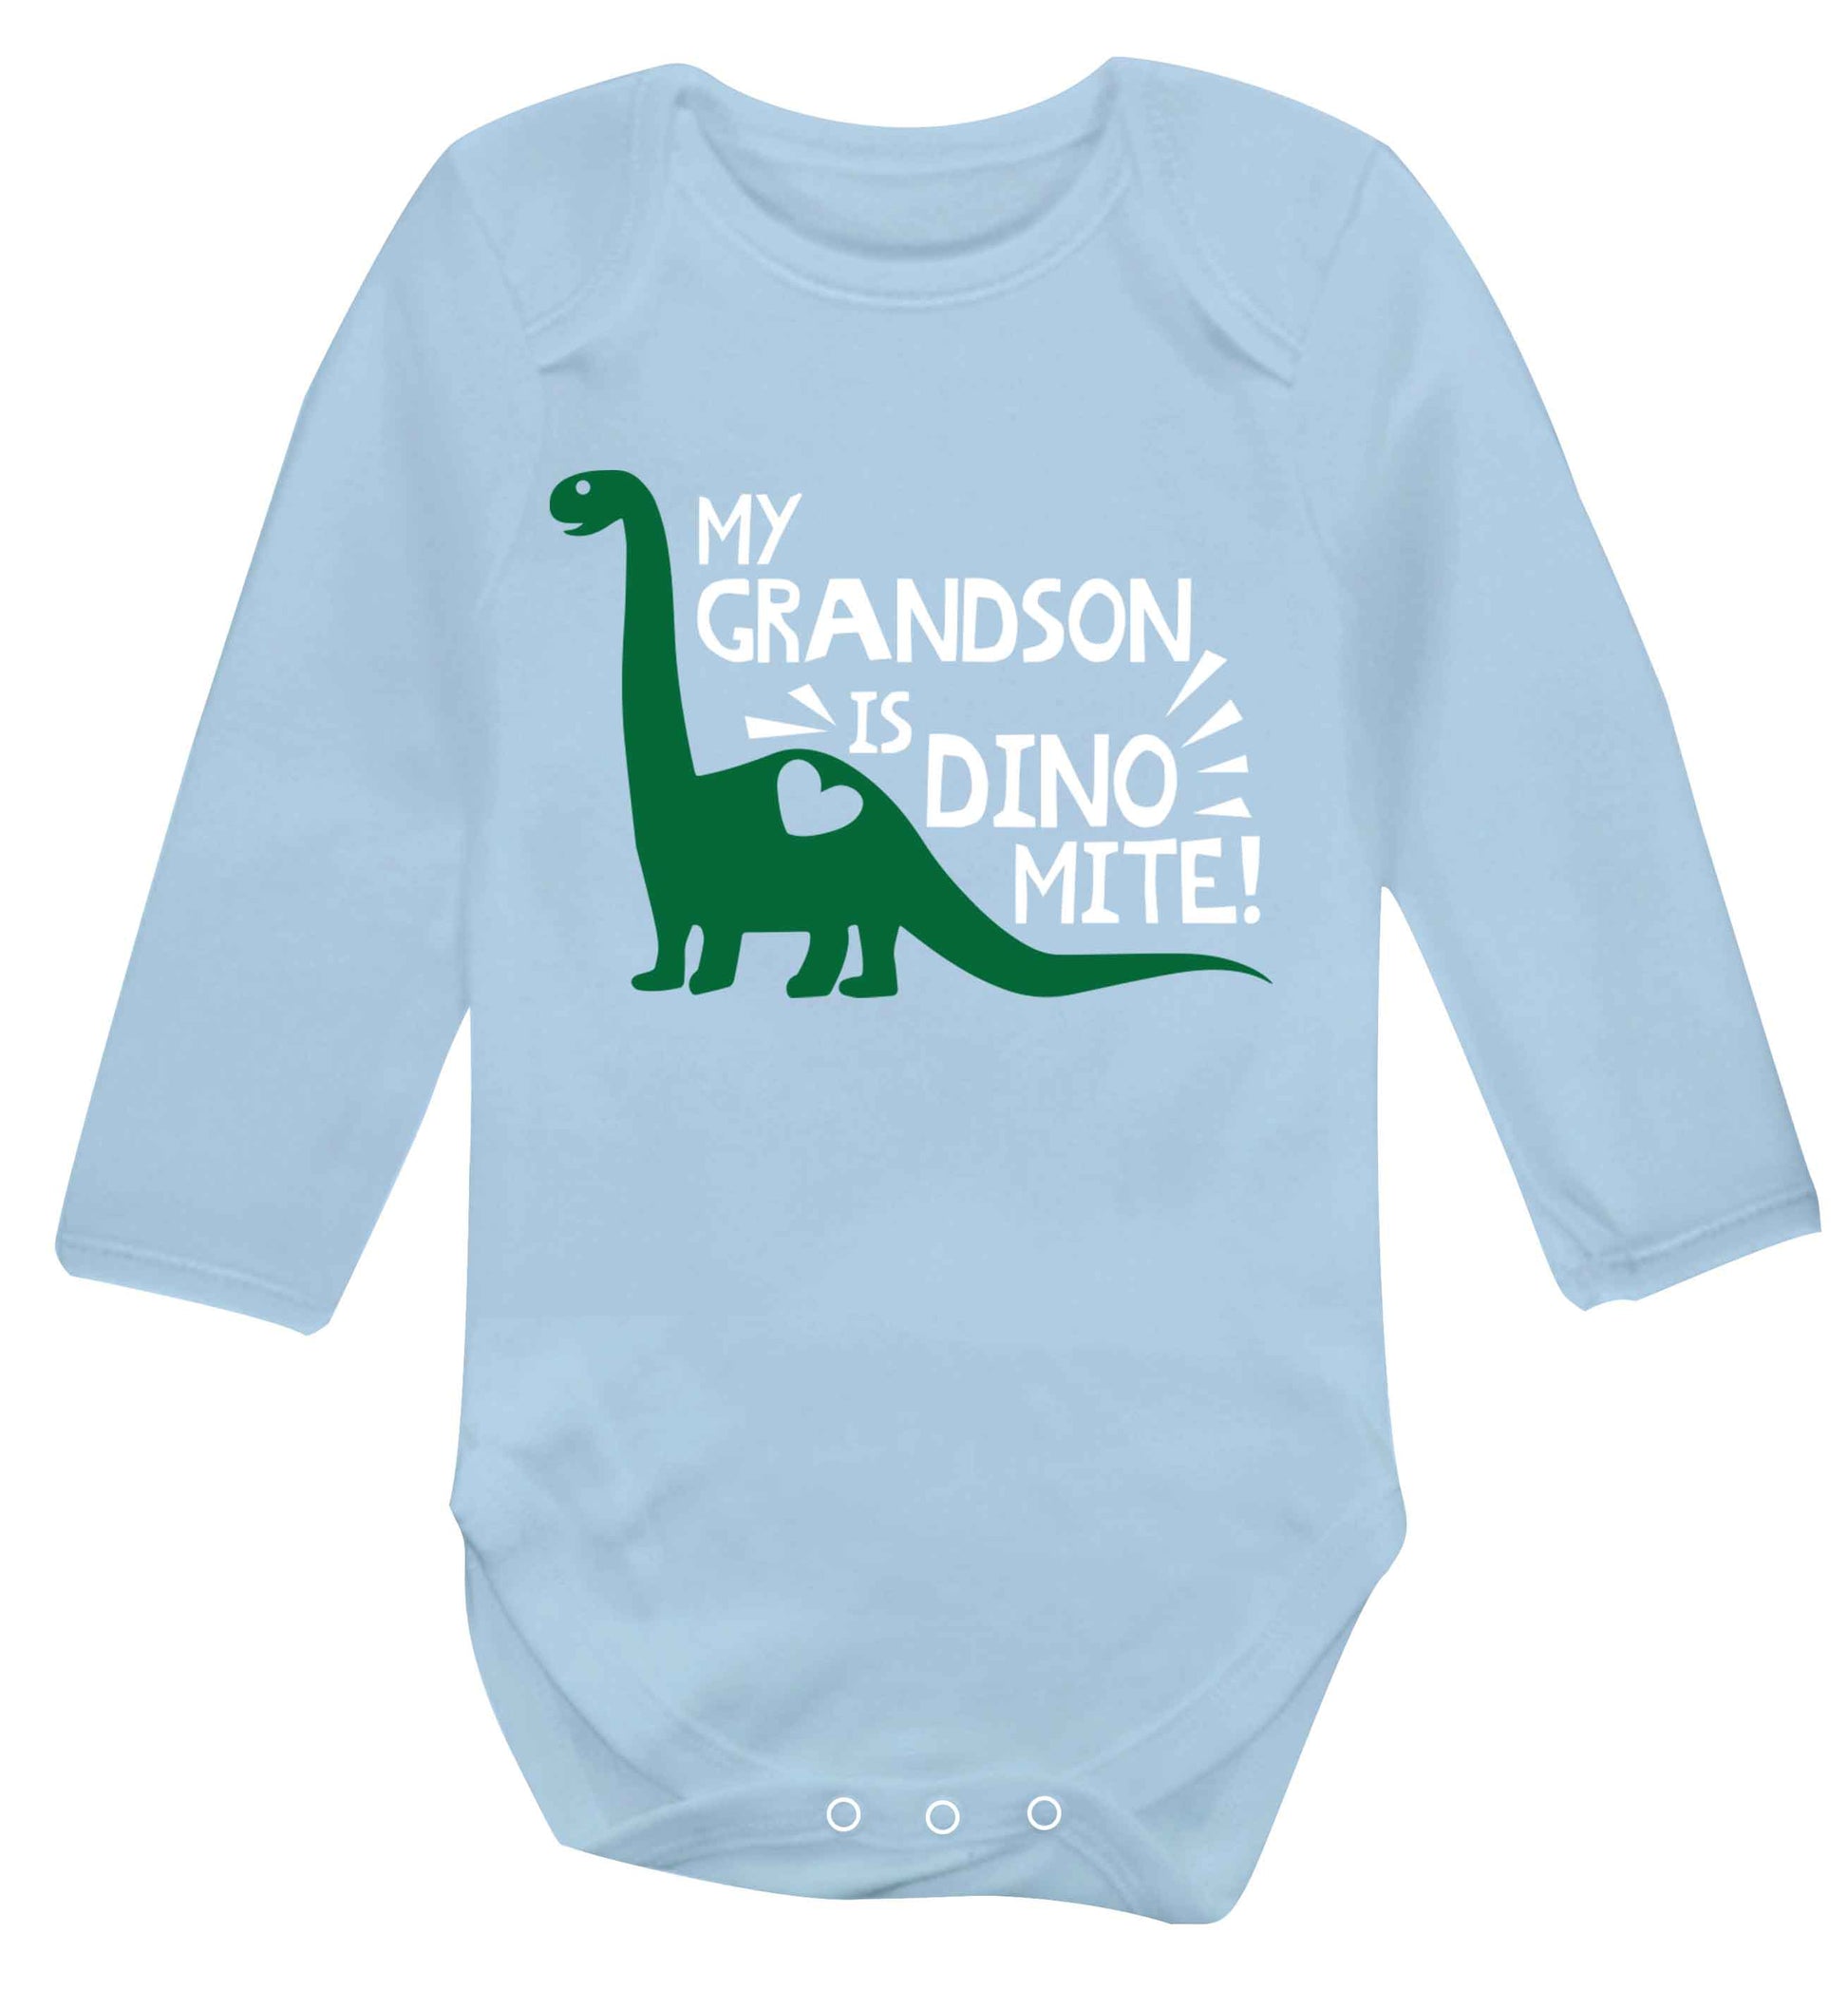 My grandson is dinomite! Baby Vest long sleeved pale blue 6-12 months